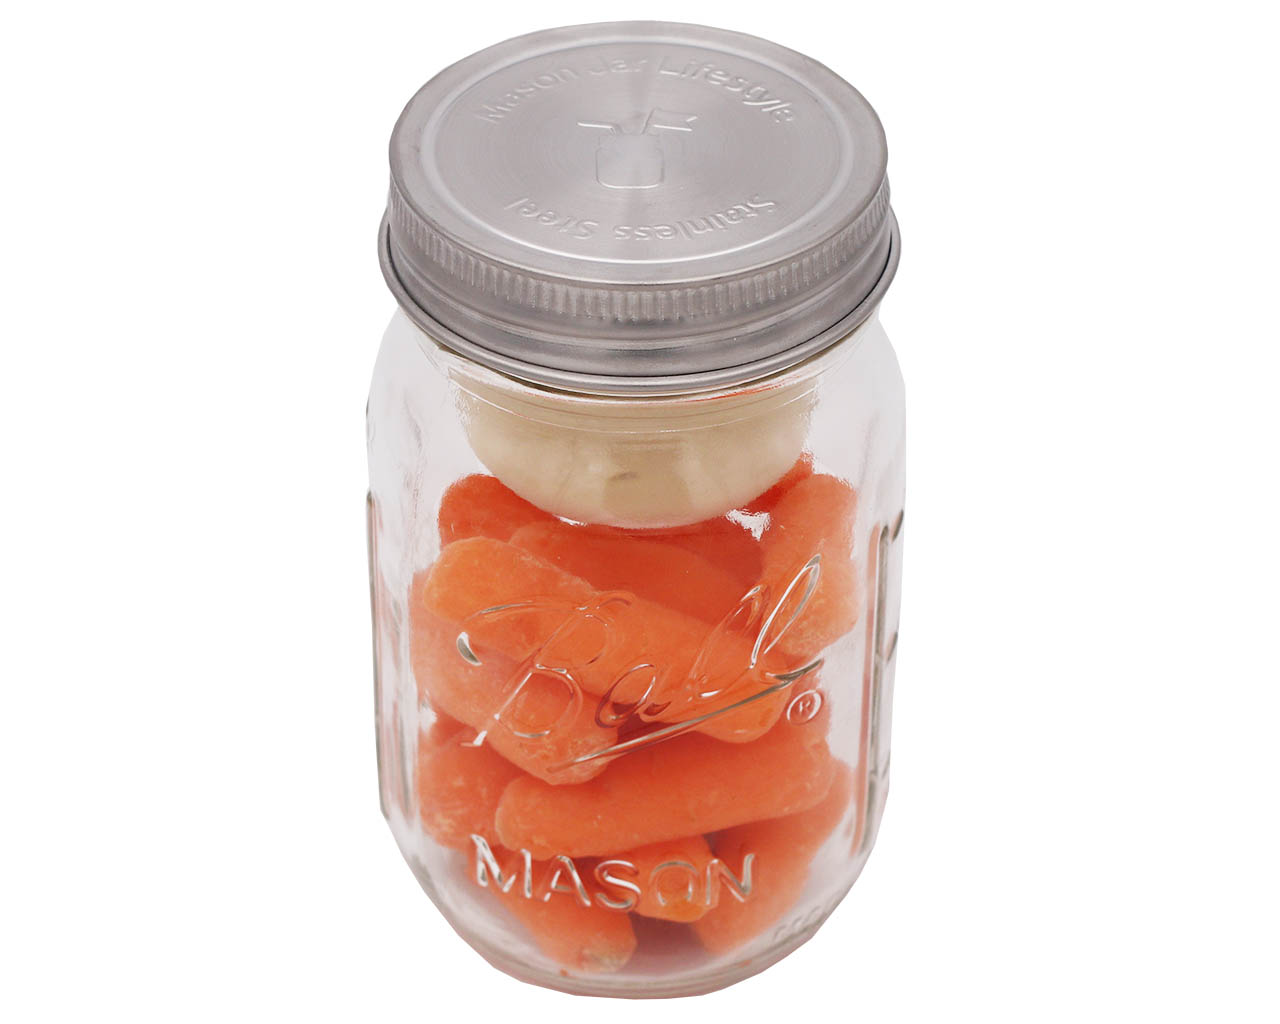 mason-jar-lifestyle-stainless-steel-storage-lid-regular-mouth-silicone-divider-up-16oz-pint-ball-ranch-dip-carrots-2